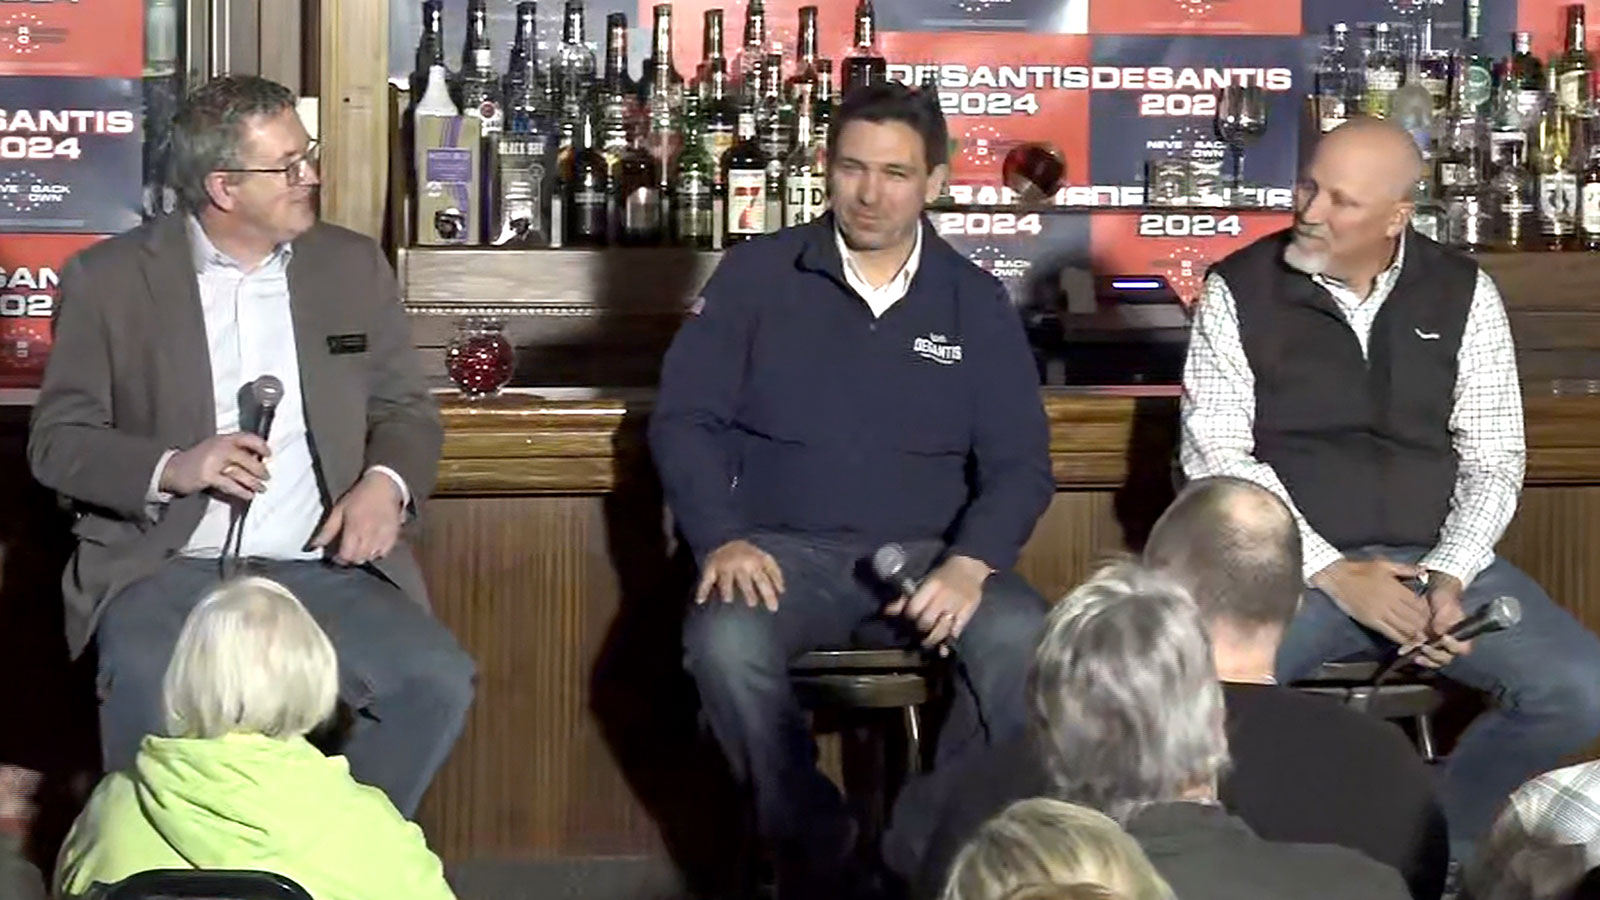 Republican presidential candidate Ron DeSantis appears at a campaign event at the Elk Lodge in Decorah, Iowa, with Kentucky Rep. Thomas Massie and Texas Rep. Chip Roy.